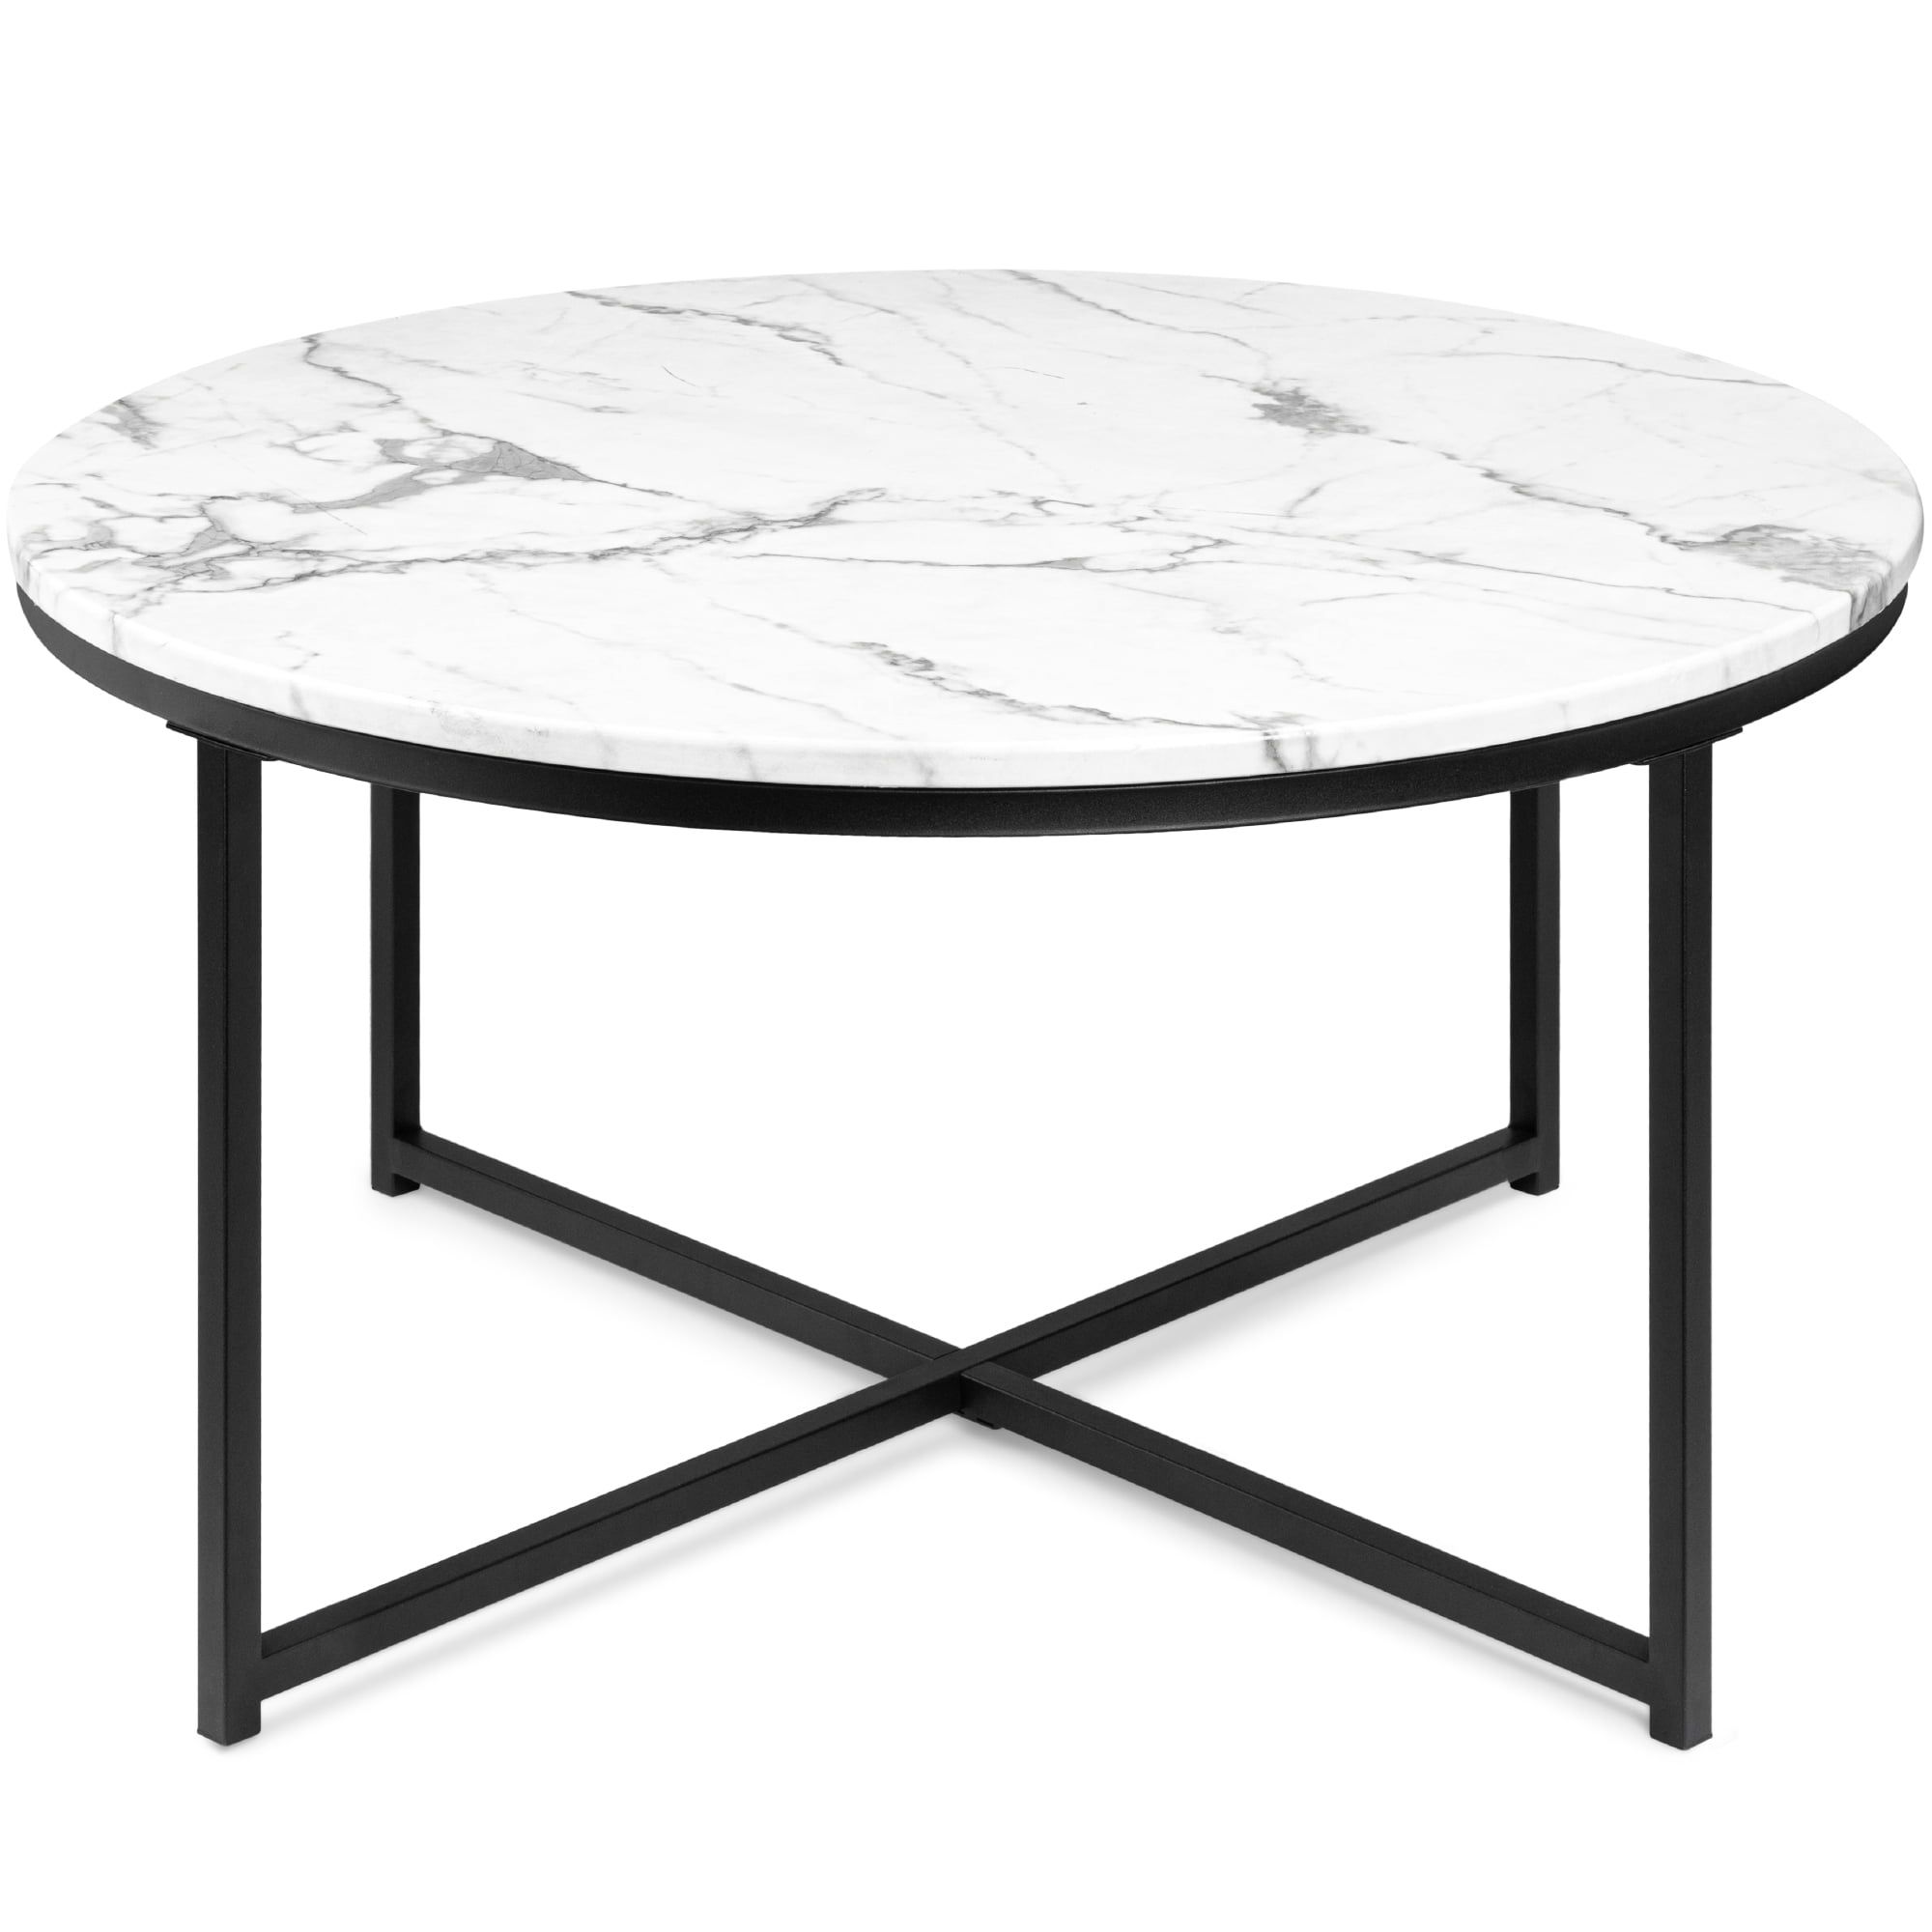 Best Choice Products 36in Faux Marble Modern Round Living Room Accent Intended For Modern Round Faux Marble Coffee Tables (Gallery 2 of 20)